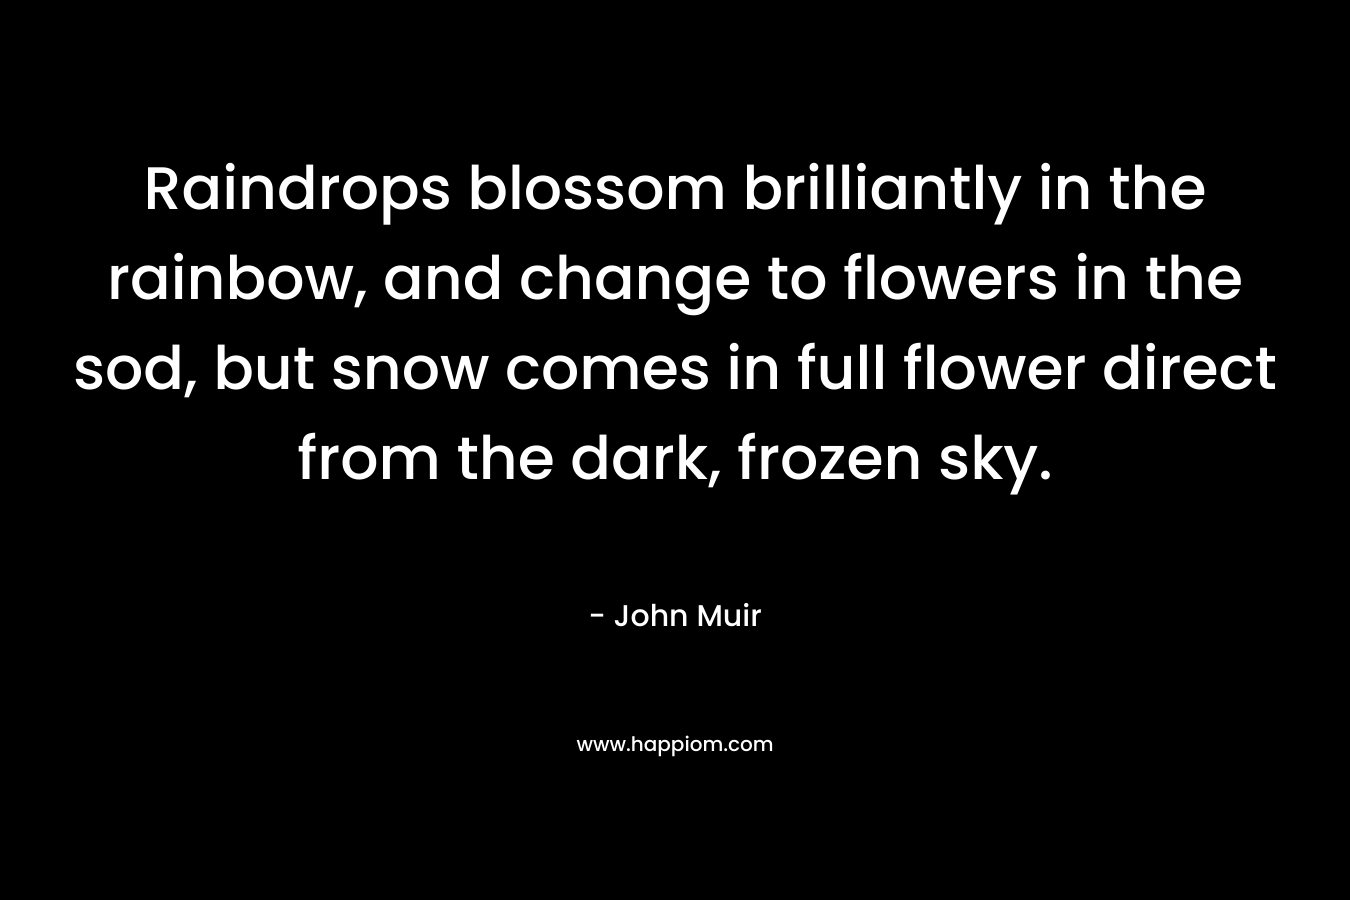 Raindrops blossom brilliantly in the rainbow, and change to flowers in the sod, but snow comes in full flower direct from the dark, frozen sky. – John Muir